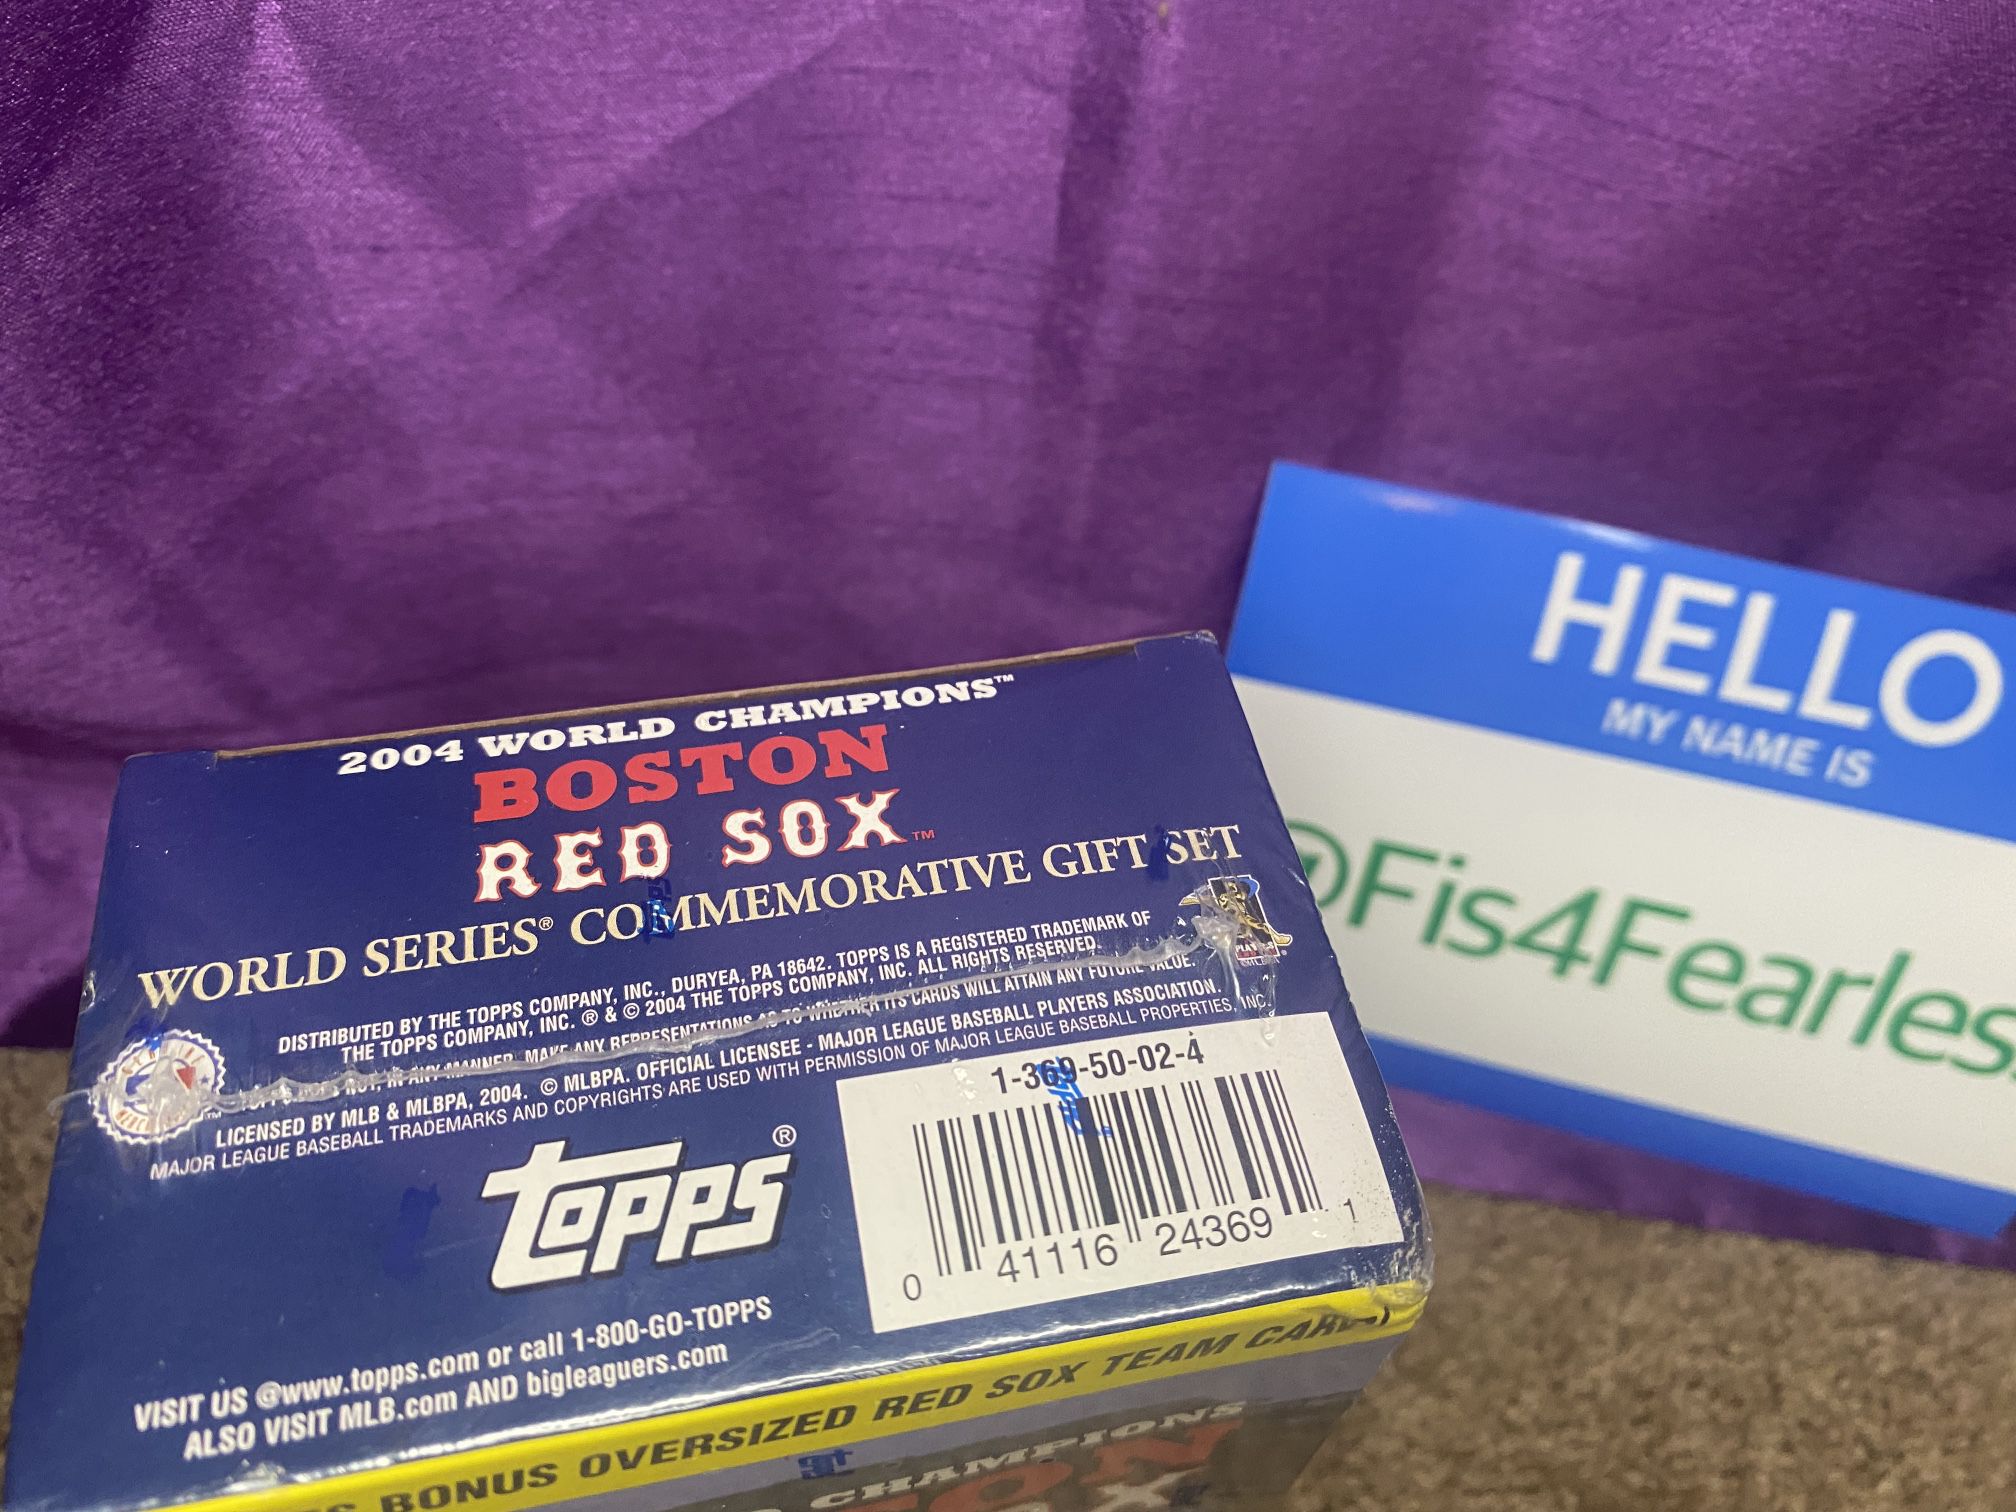 2004 Topps Boston Red Sox World Series Commemorative Gift Set - 55 Cards SEALED. 